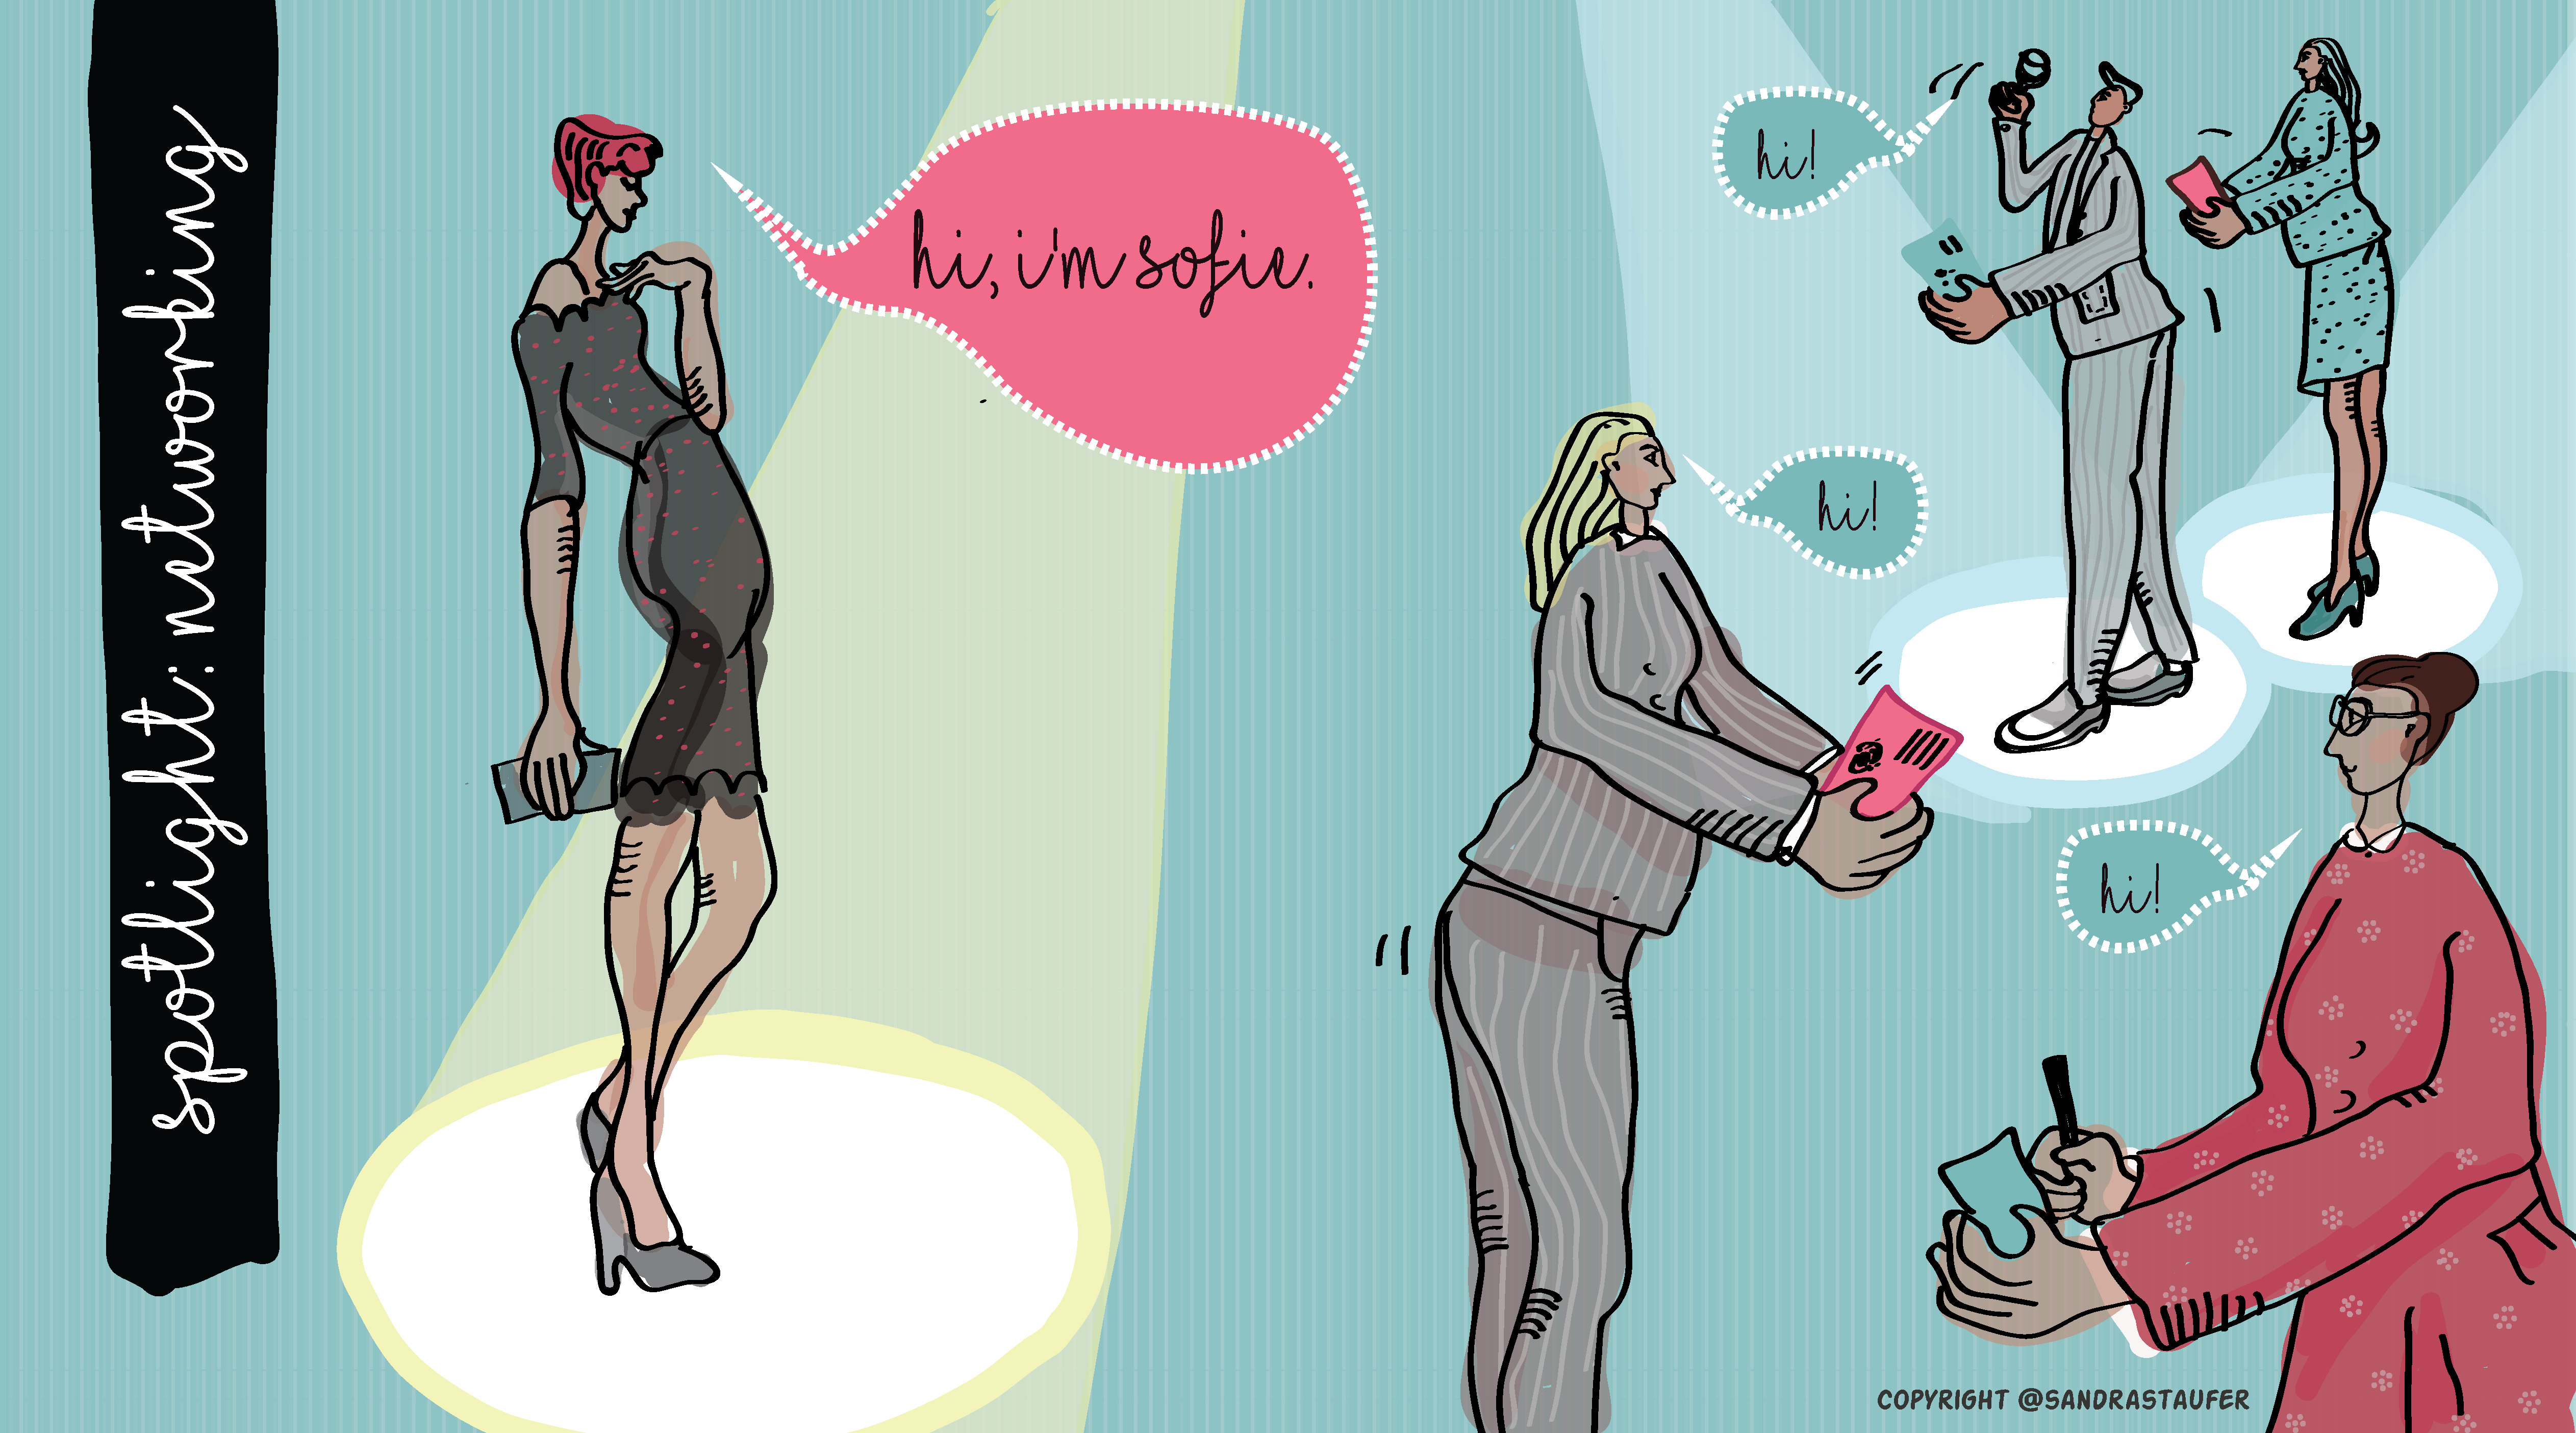 KEEPING UP WITH THE NETWORKING FRENCY, ILLUSTRATION BY @SANDRASTAUFER